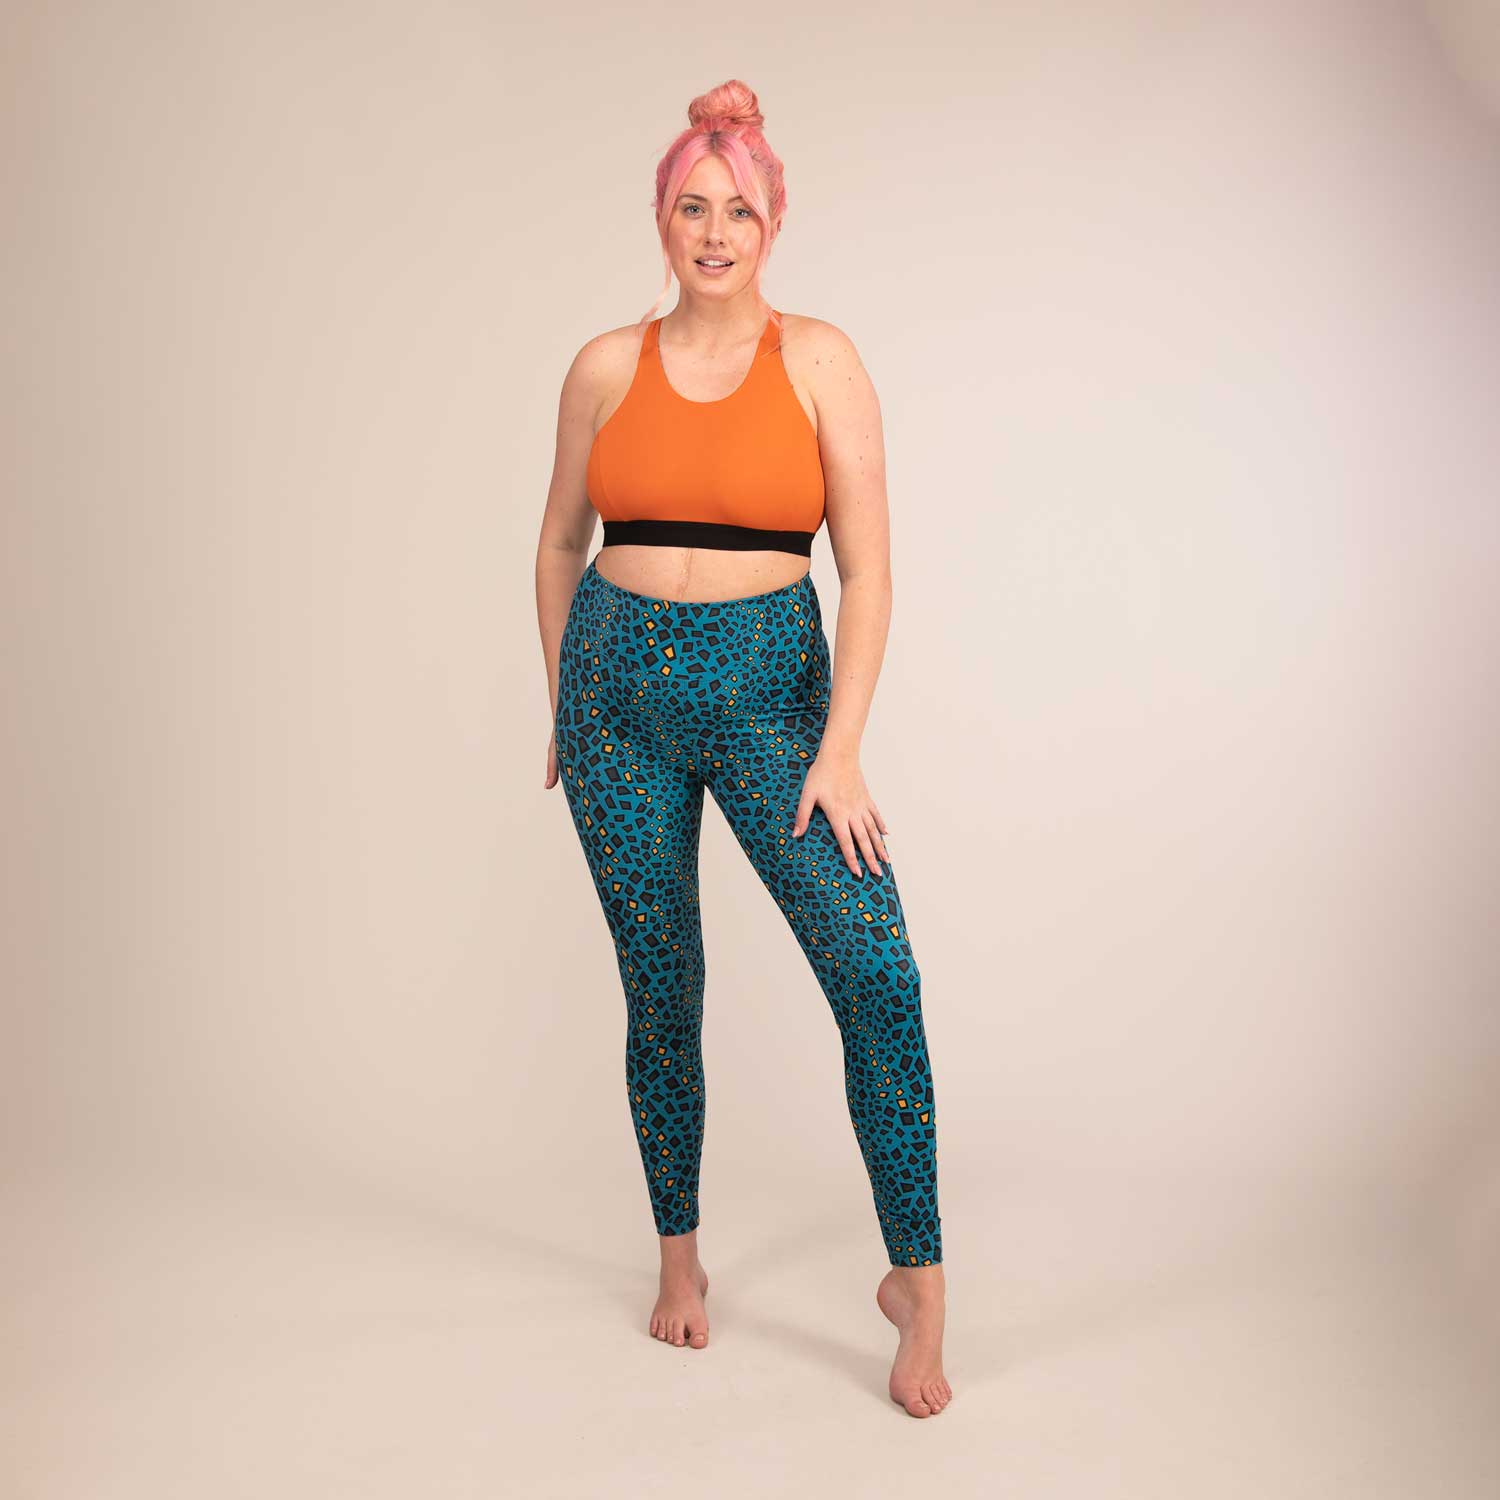 EQUINOX MINIMAL REPTILE | Reversible Recycled Sports Bra | 3RD ROCK Clothing -  Sophie is a 34G with a 32" underbust, 40.5" overbust and wears a size 16 F